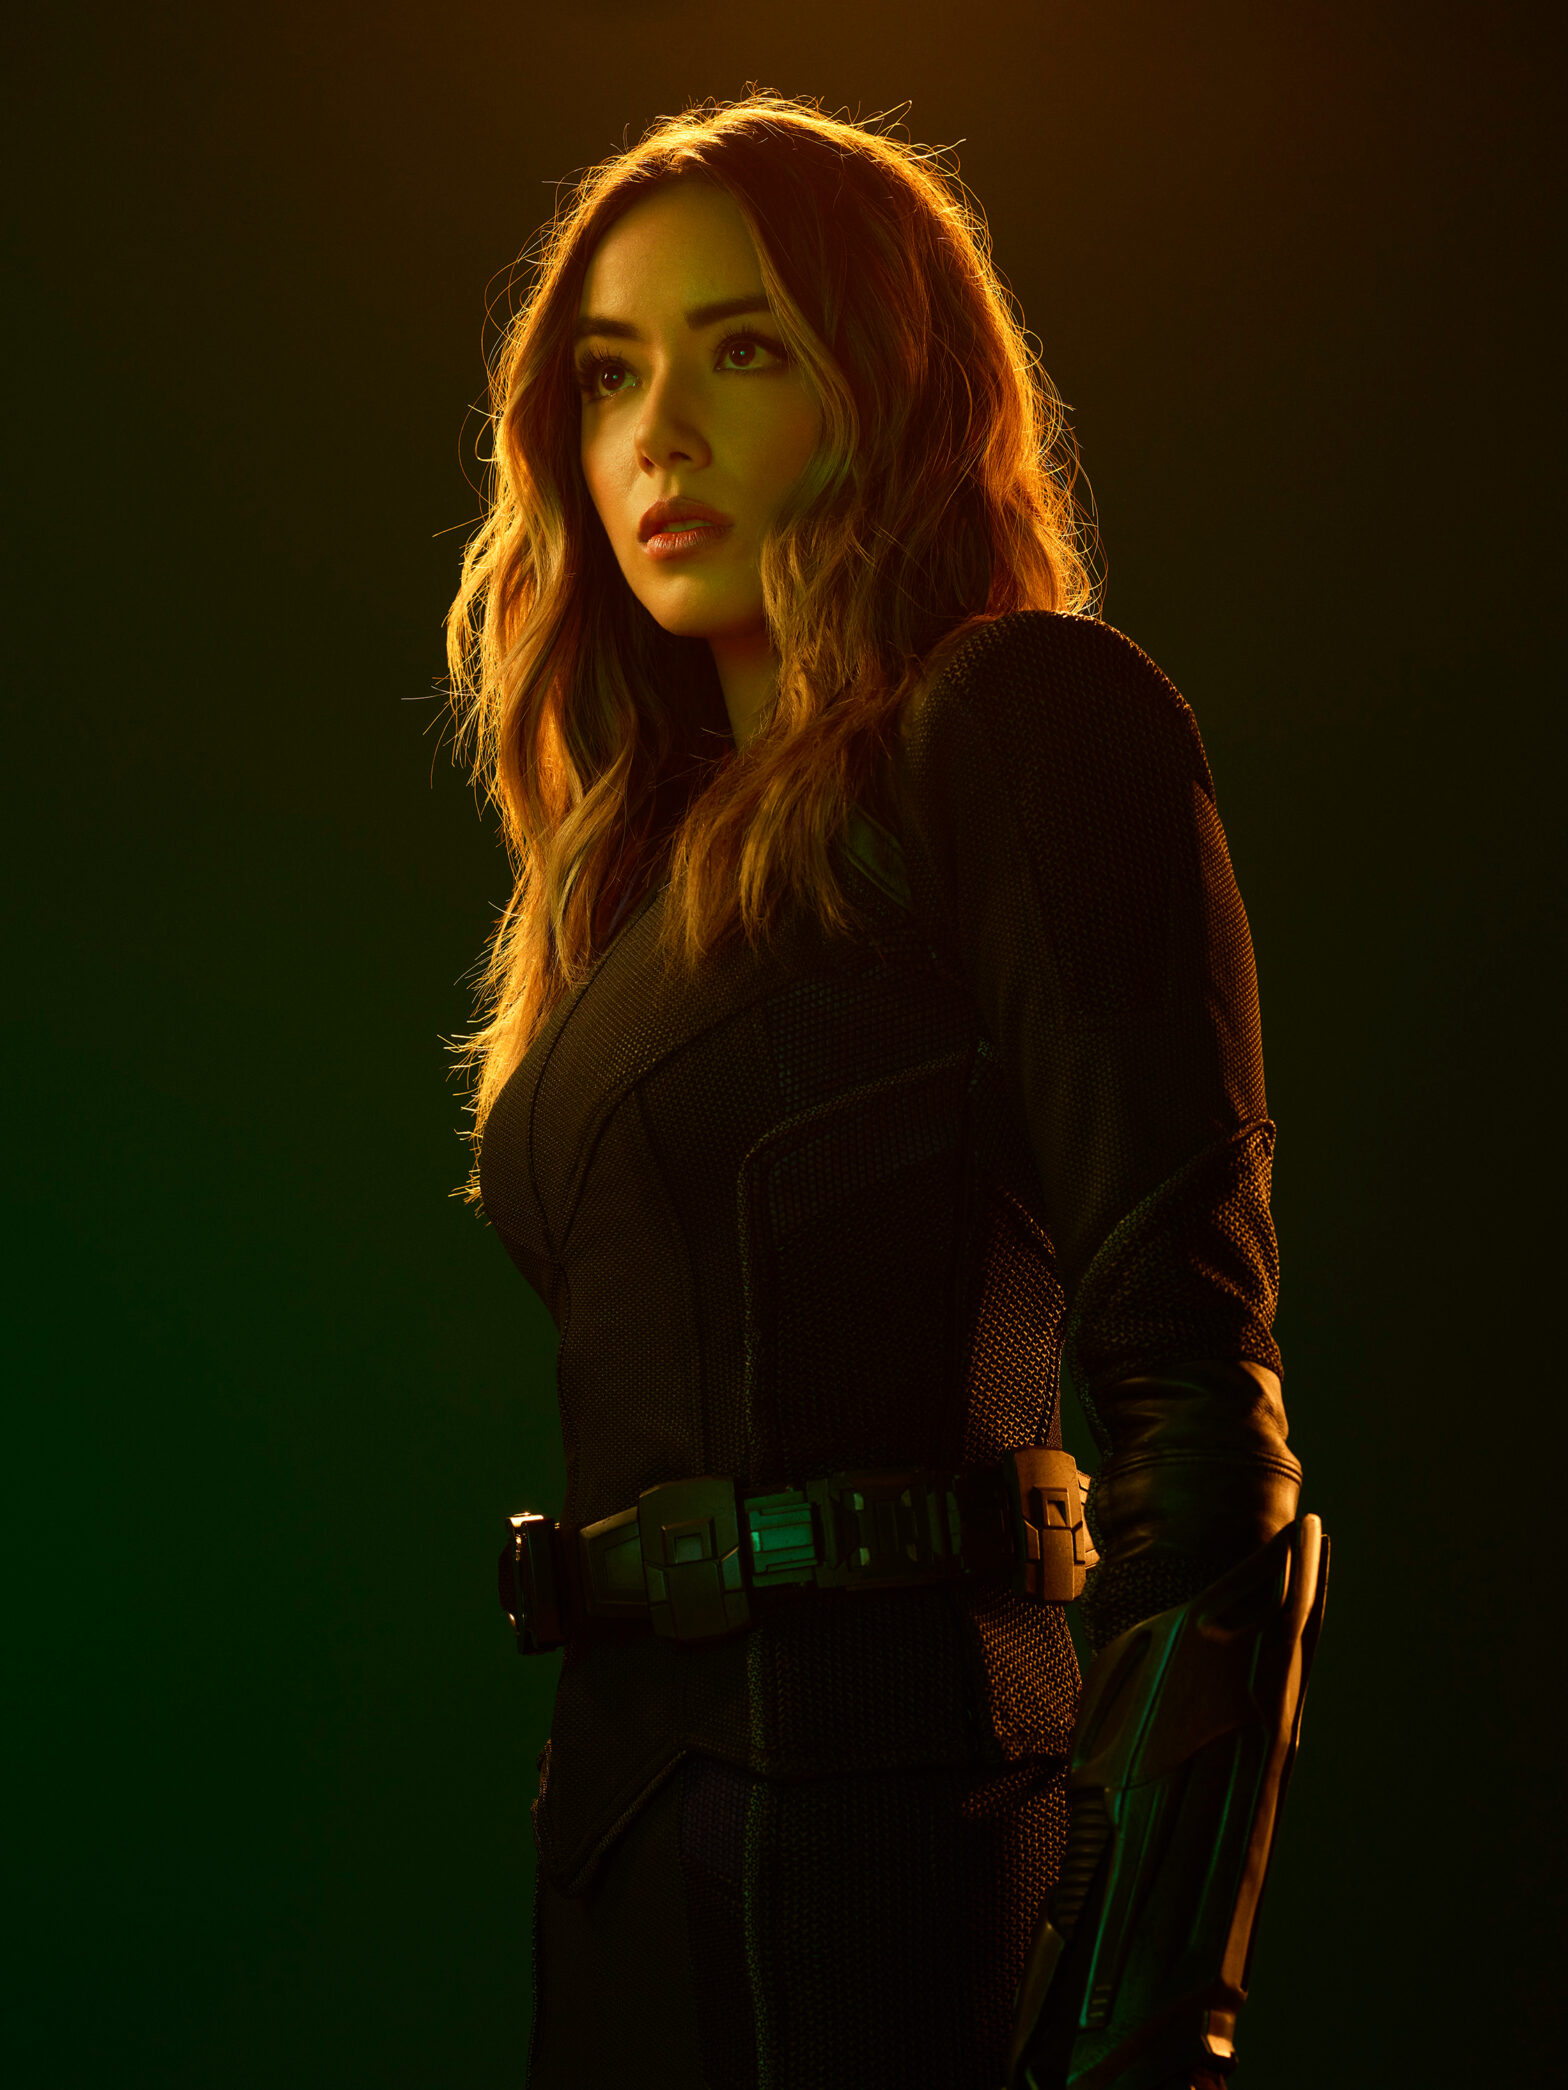 Chloe Bennet Returning As Quake For New Marvel Series Our Scoop Confirmed